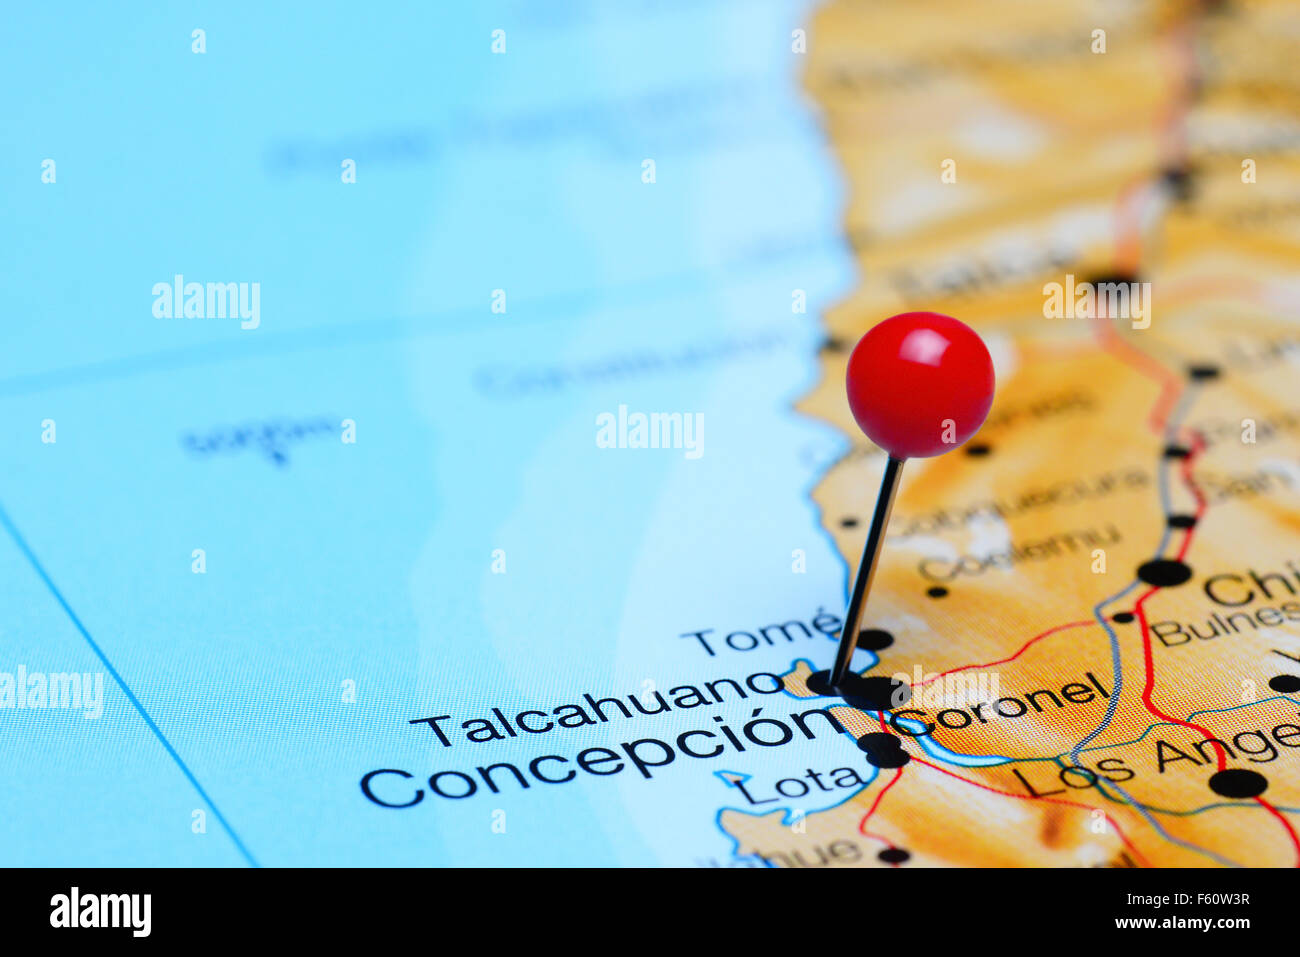 Talcahuano pinned on a map of Chile Stock Photo